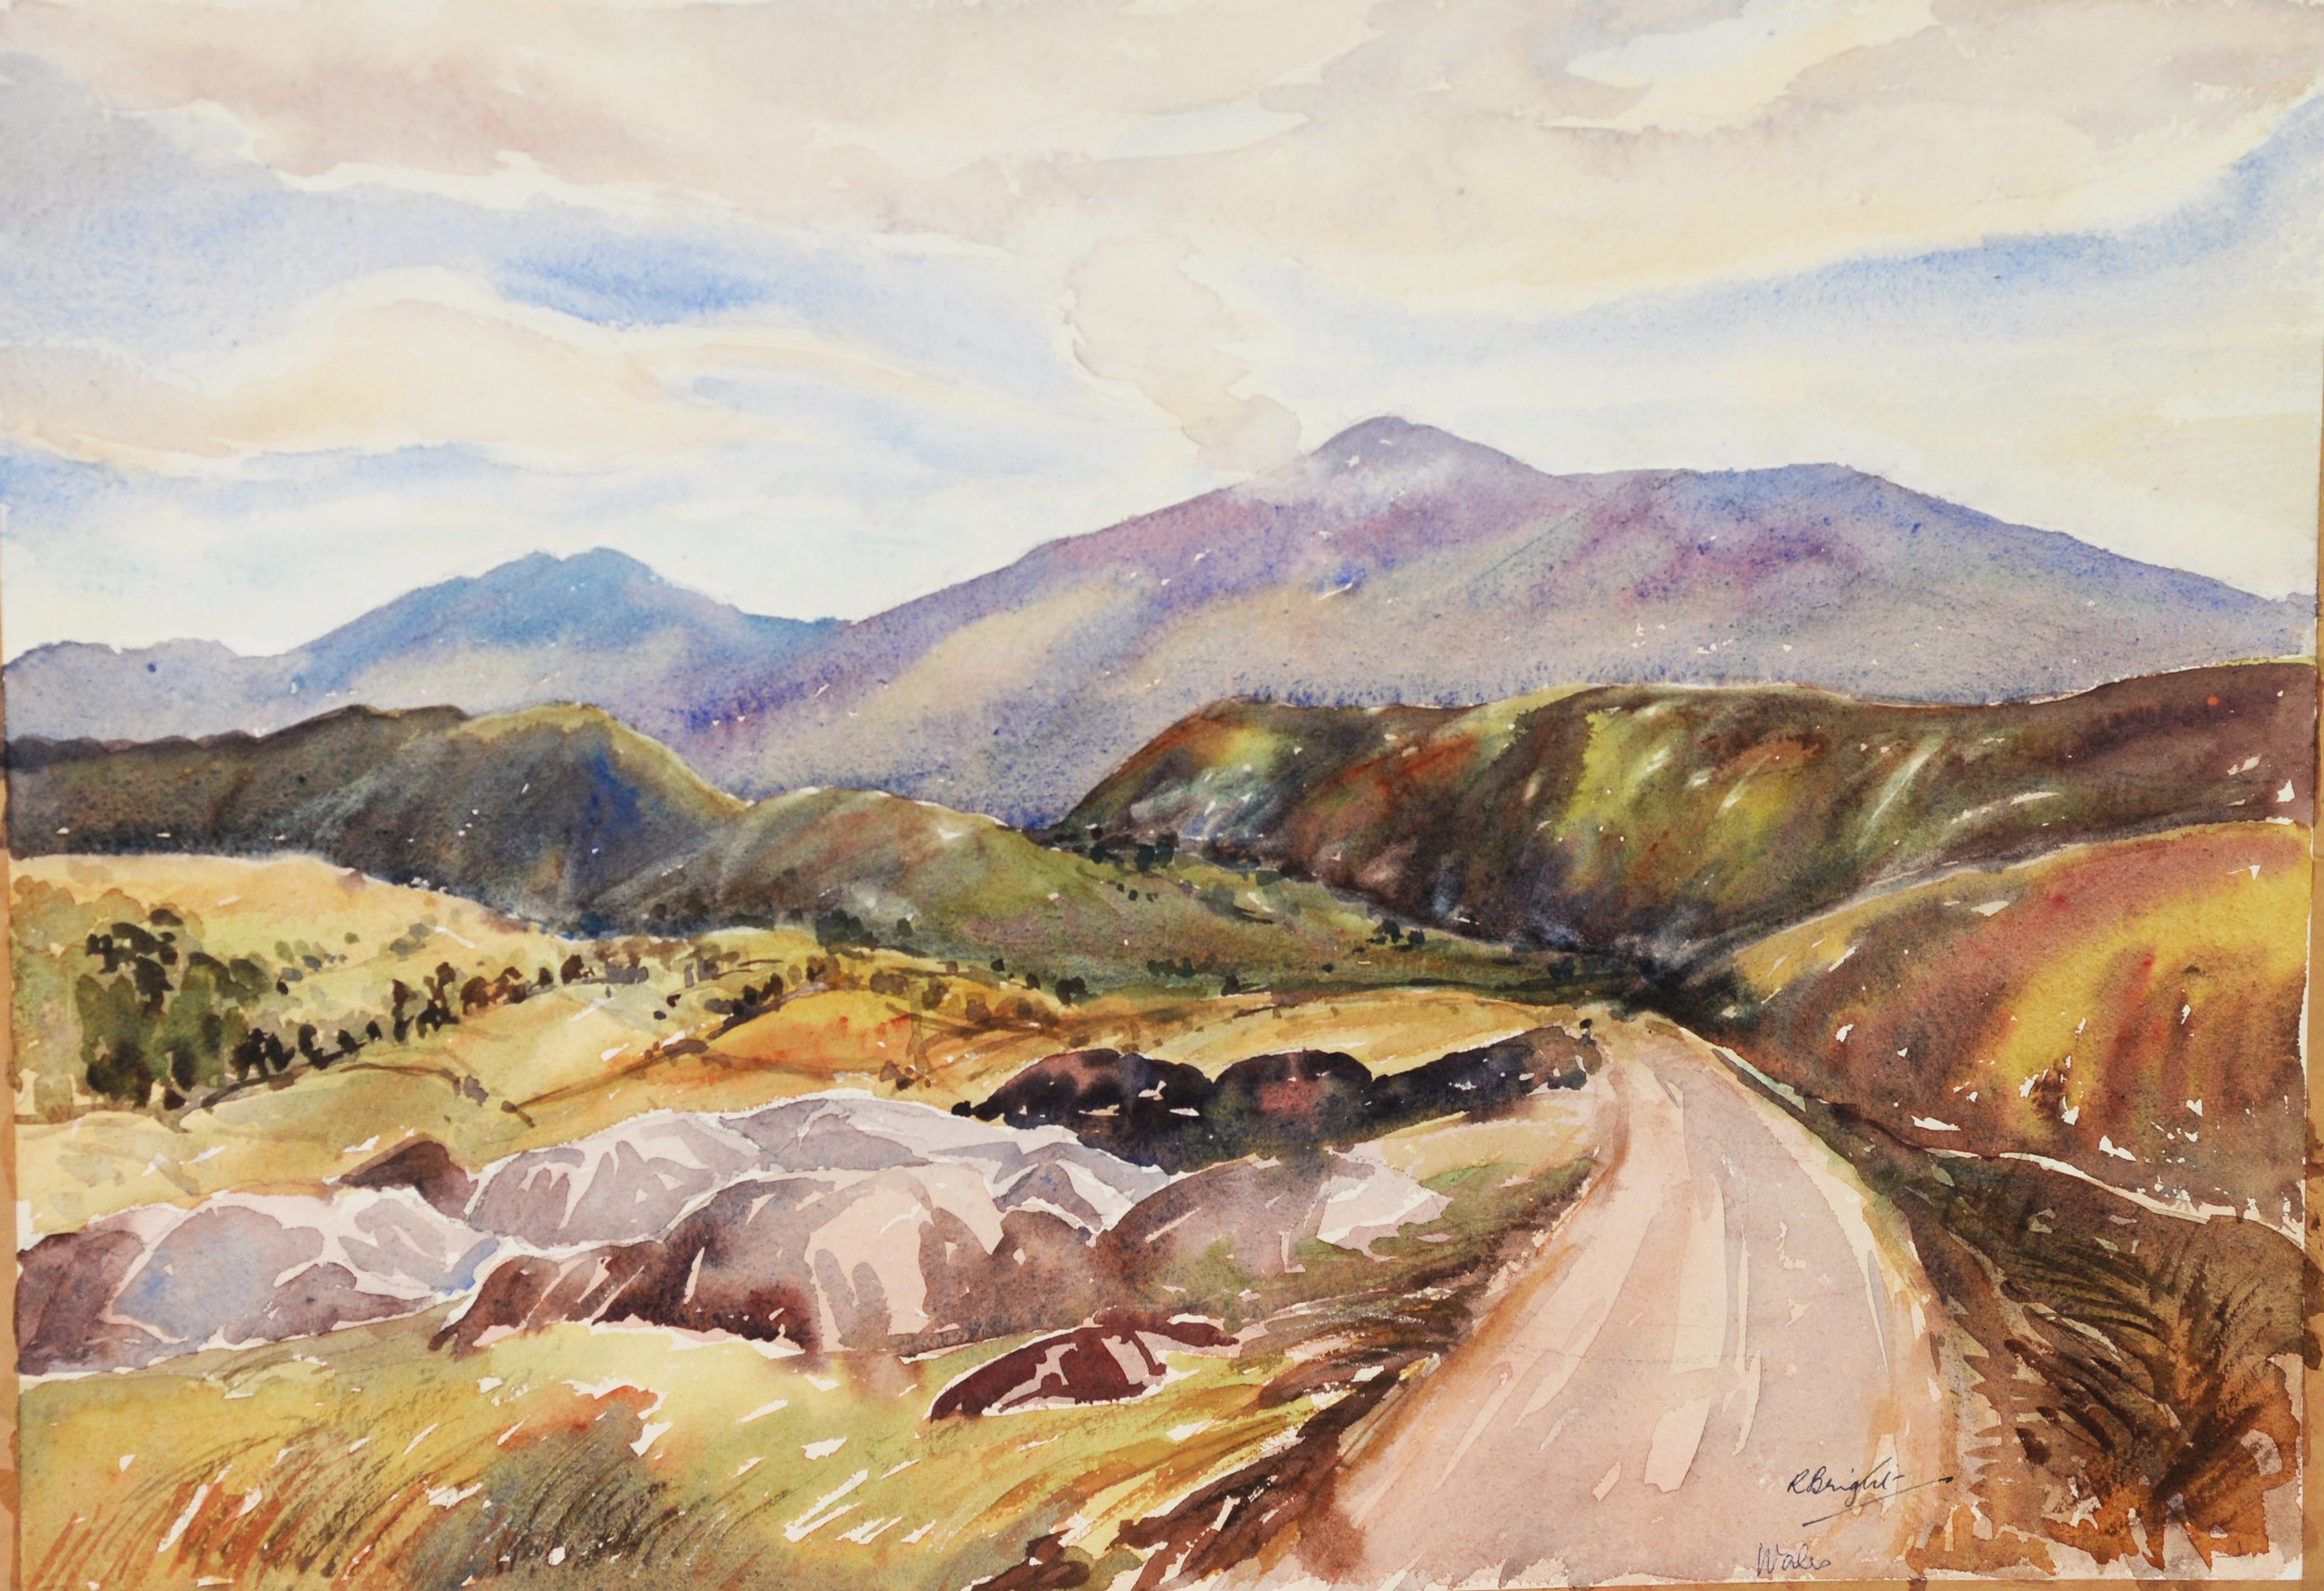 RUTH BRIGHT (20th CENTURY), IN EXCESS OF 100 UNFRAMED WATERCOLOUR DRAWINGS, MOSTLY LANDSCAPE - Image 4 of 4